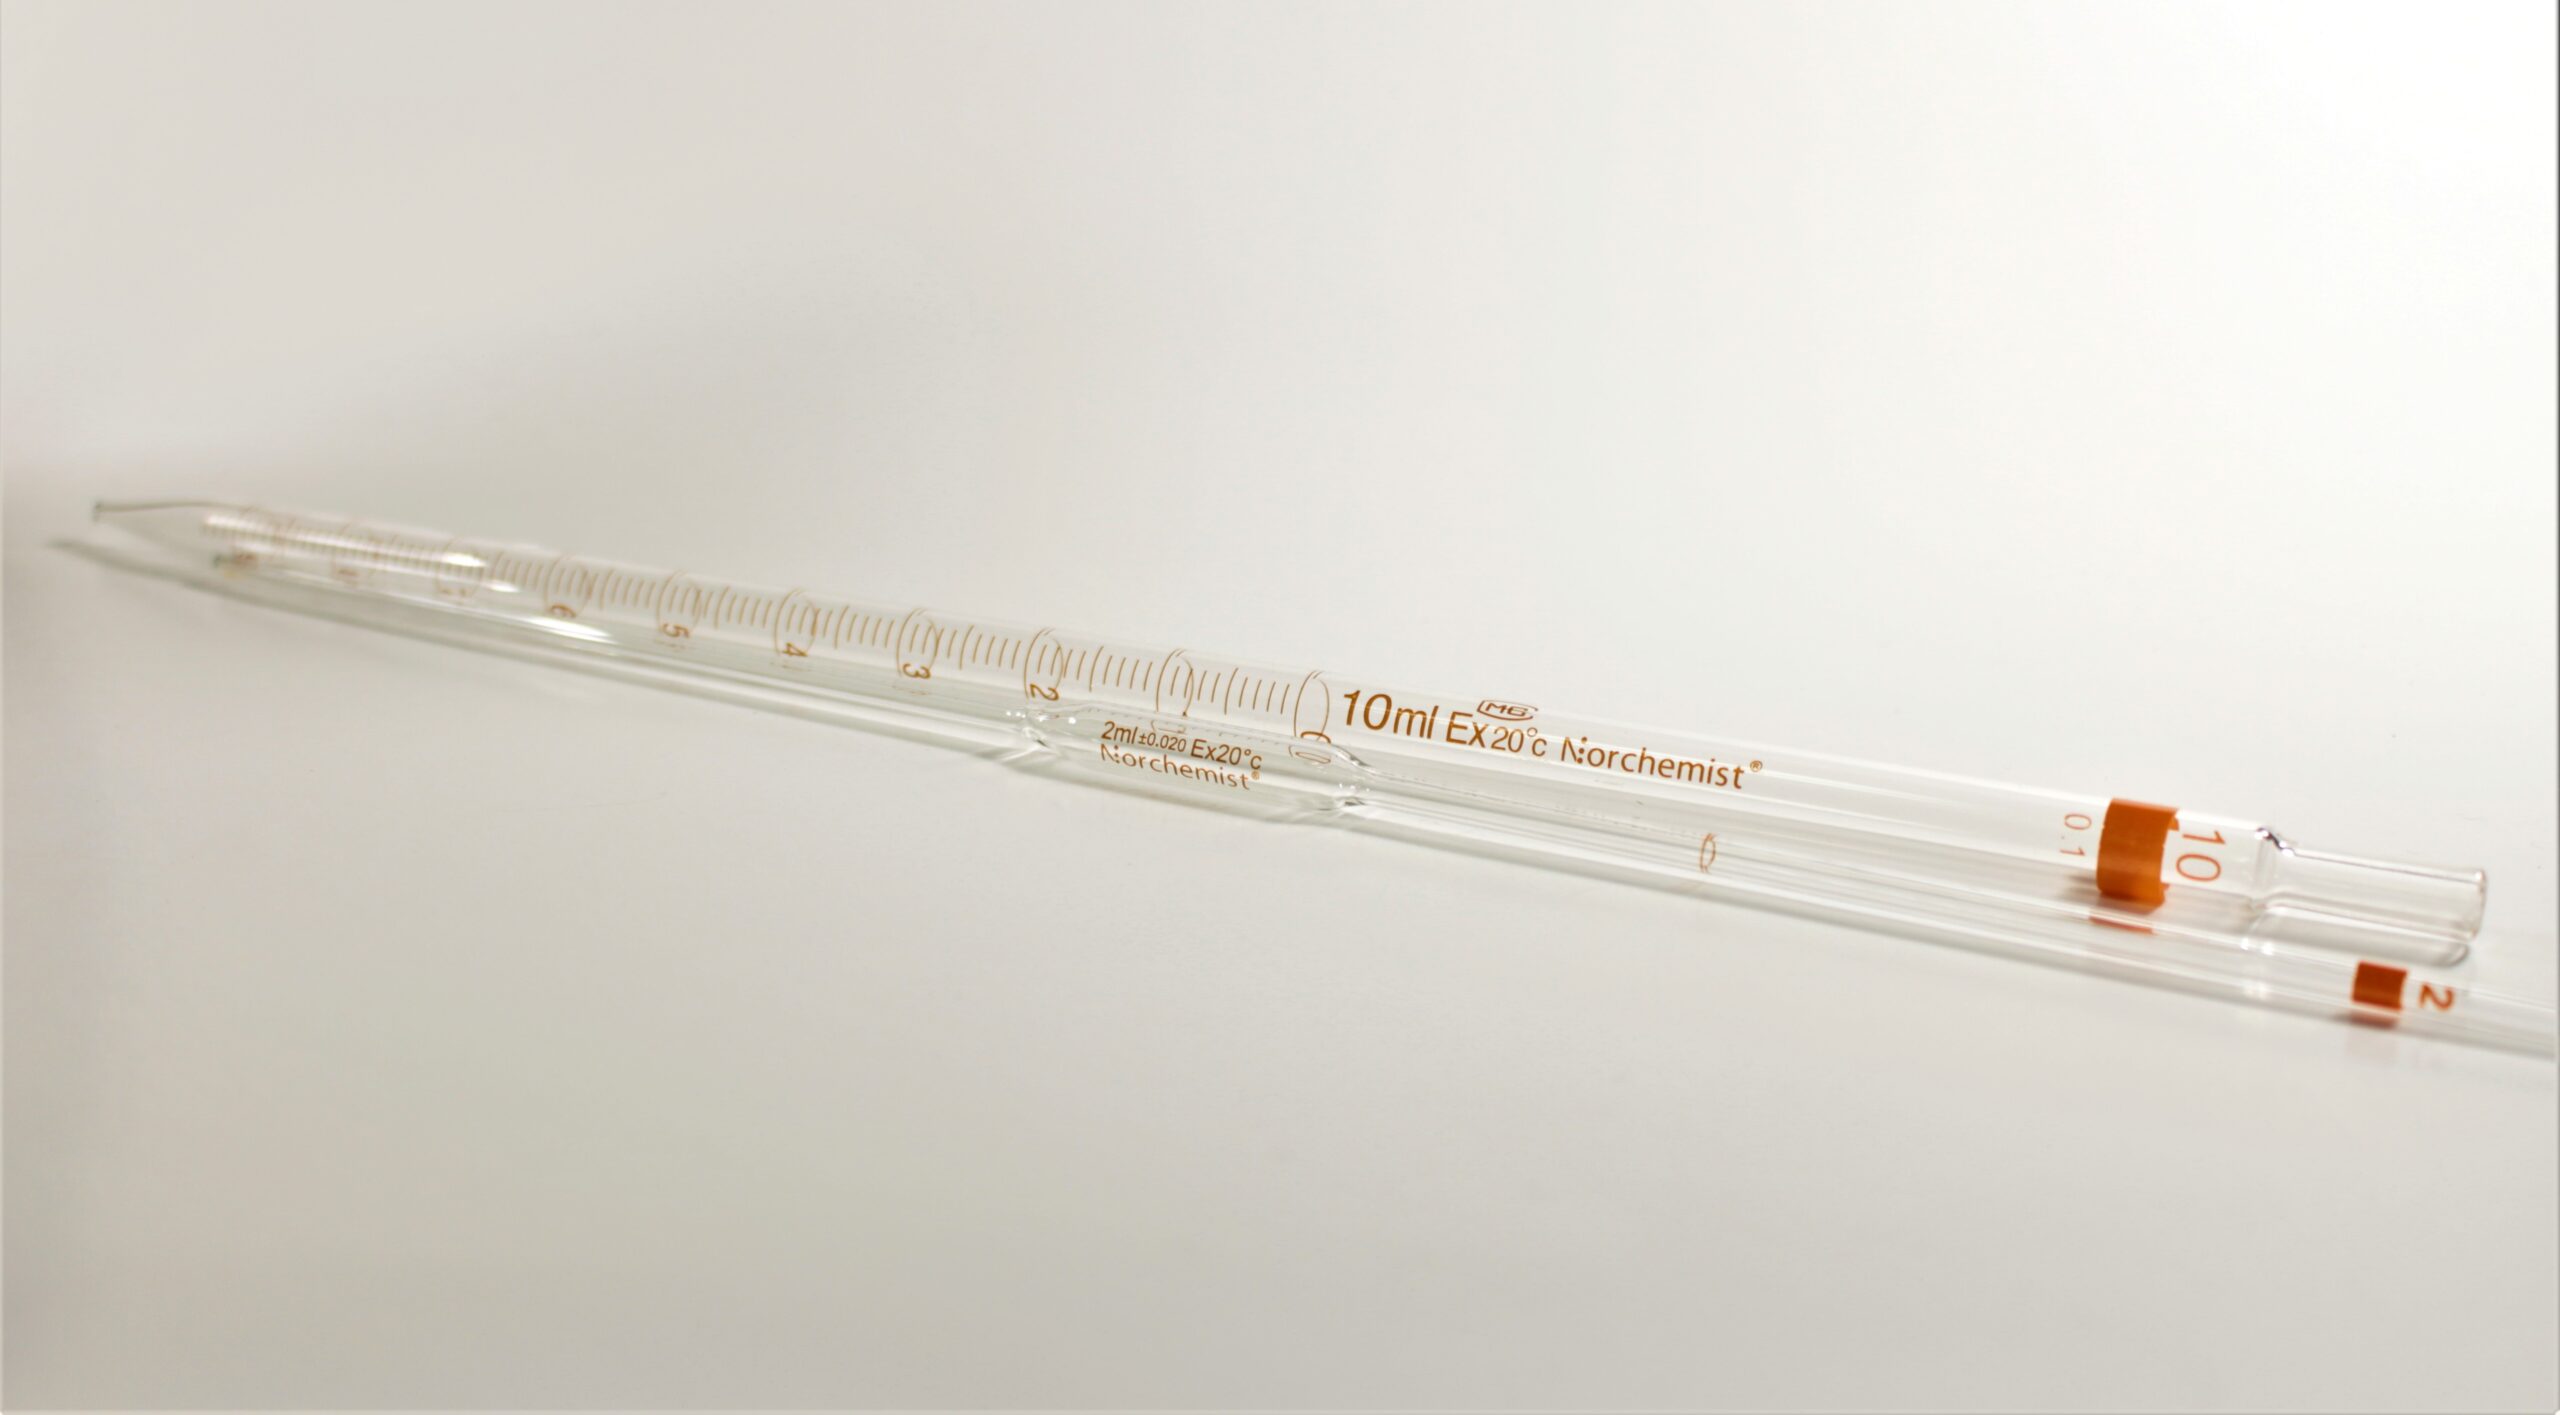 Pipette 23.6.13 download the last version for ios